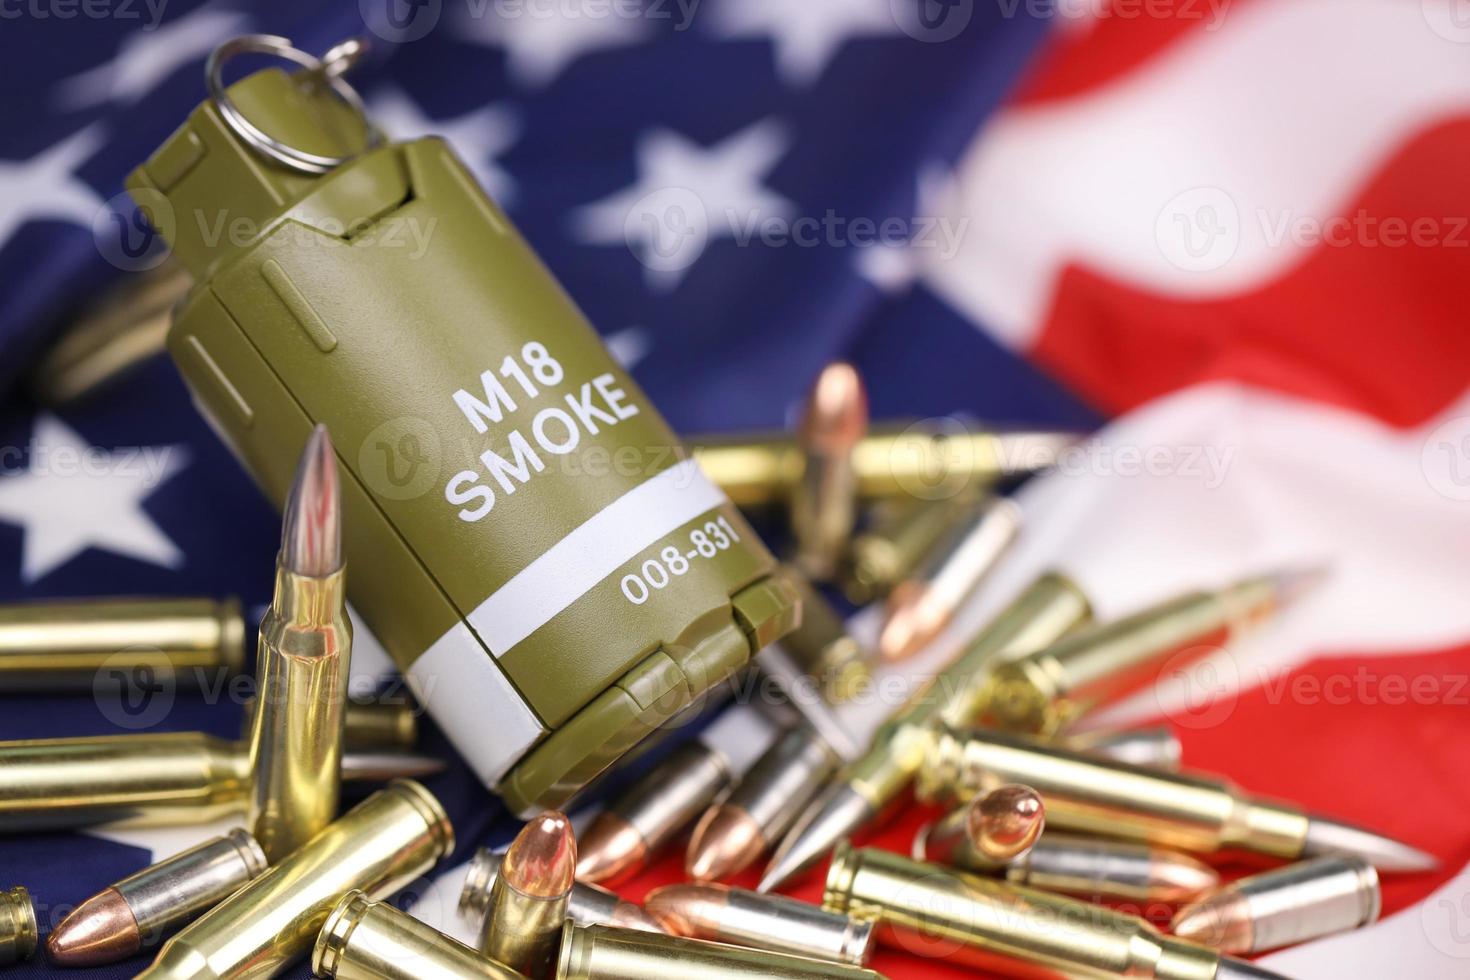 M18 smoke grenade and many yellow bullets and cartridges on United States flag. Concept of gun trafficking on USA territory or spec ops photo